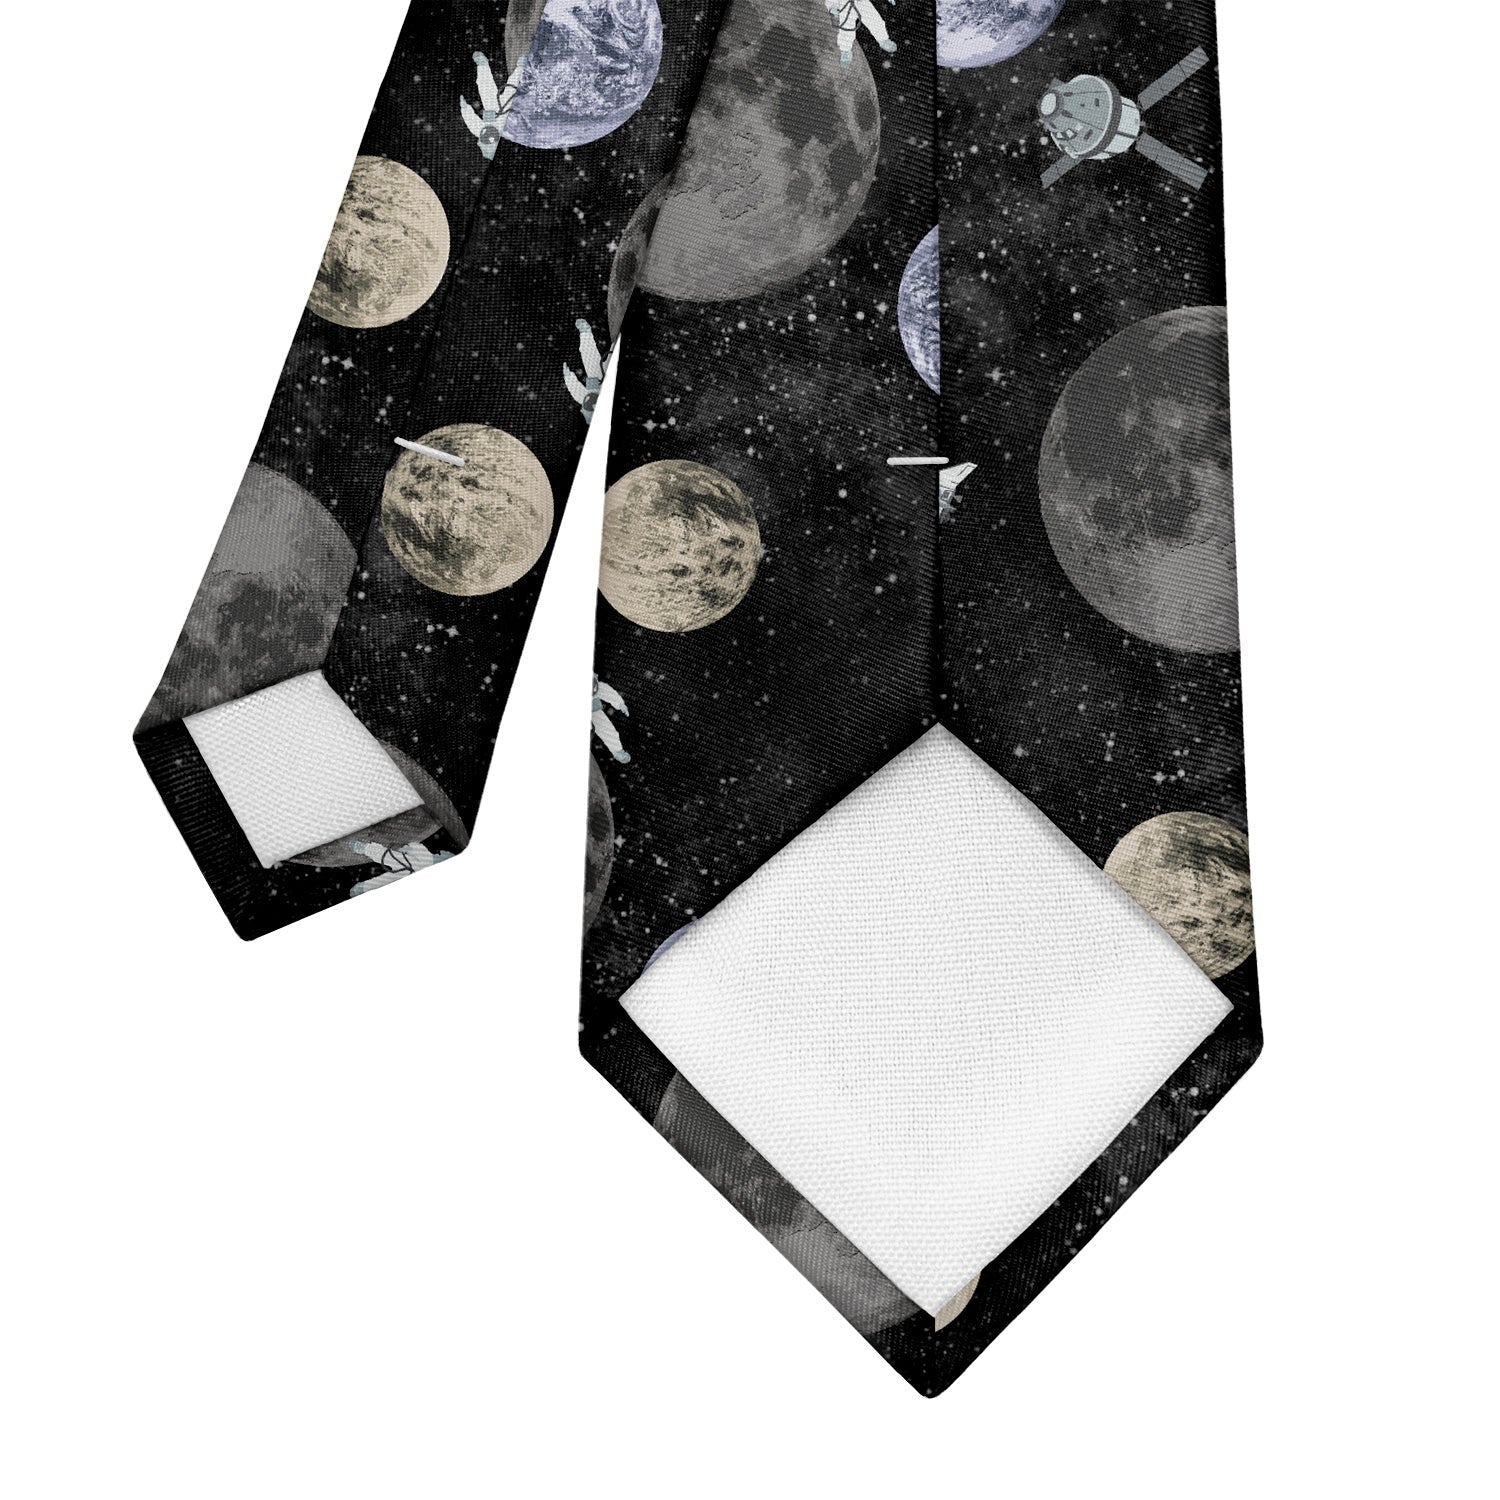 Outer Space Necktie - Tipping - Knotty Tie Co.